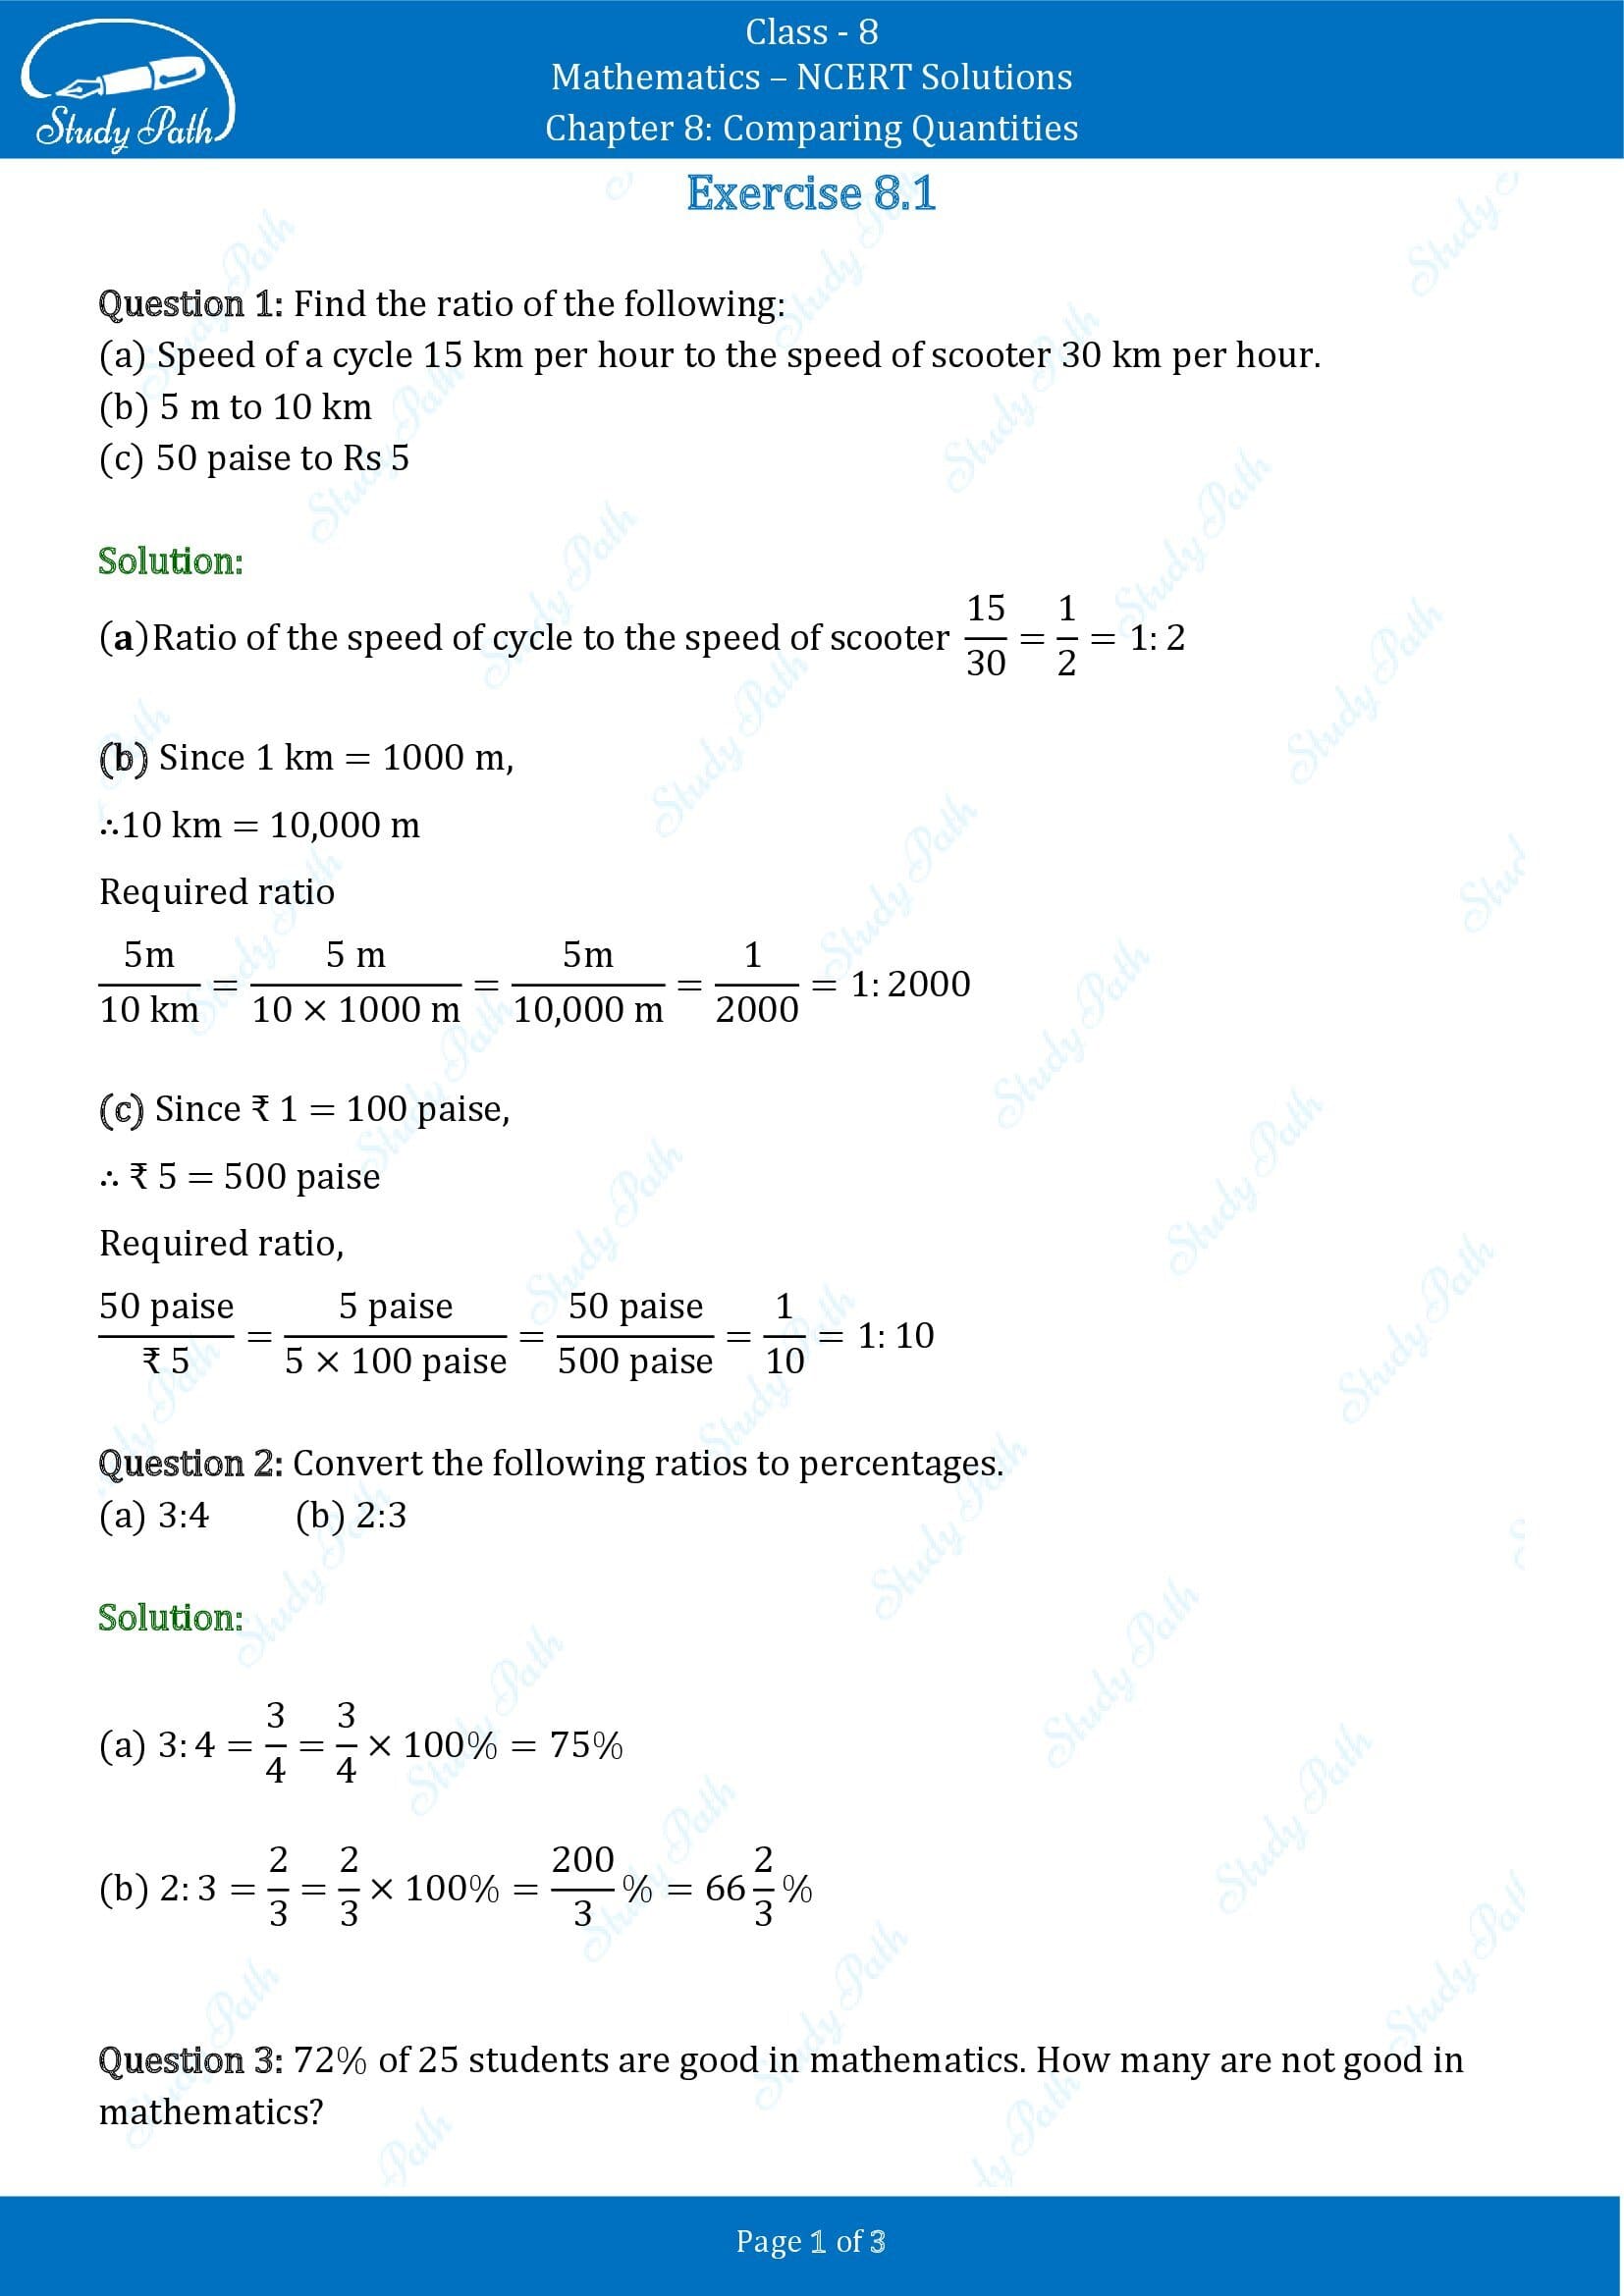 NCERT Solutions for Class 8 Maths Chapter 8 Comparing Quantities Exercise 8.1 00001